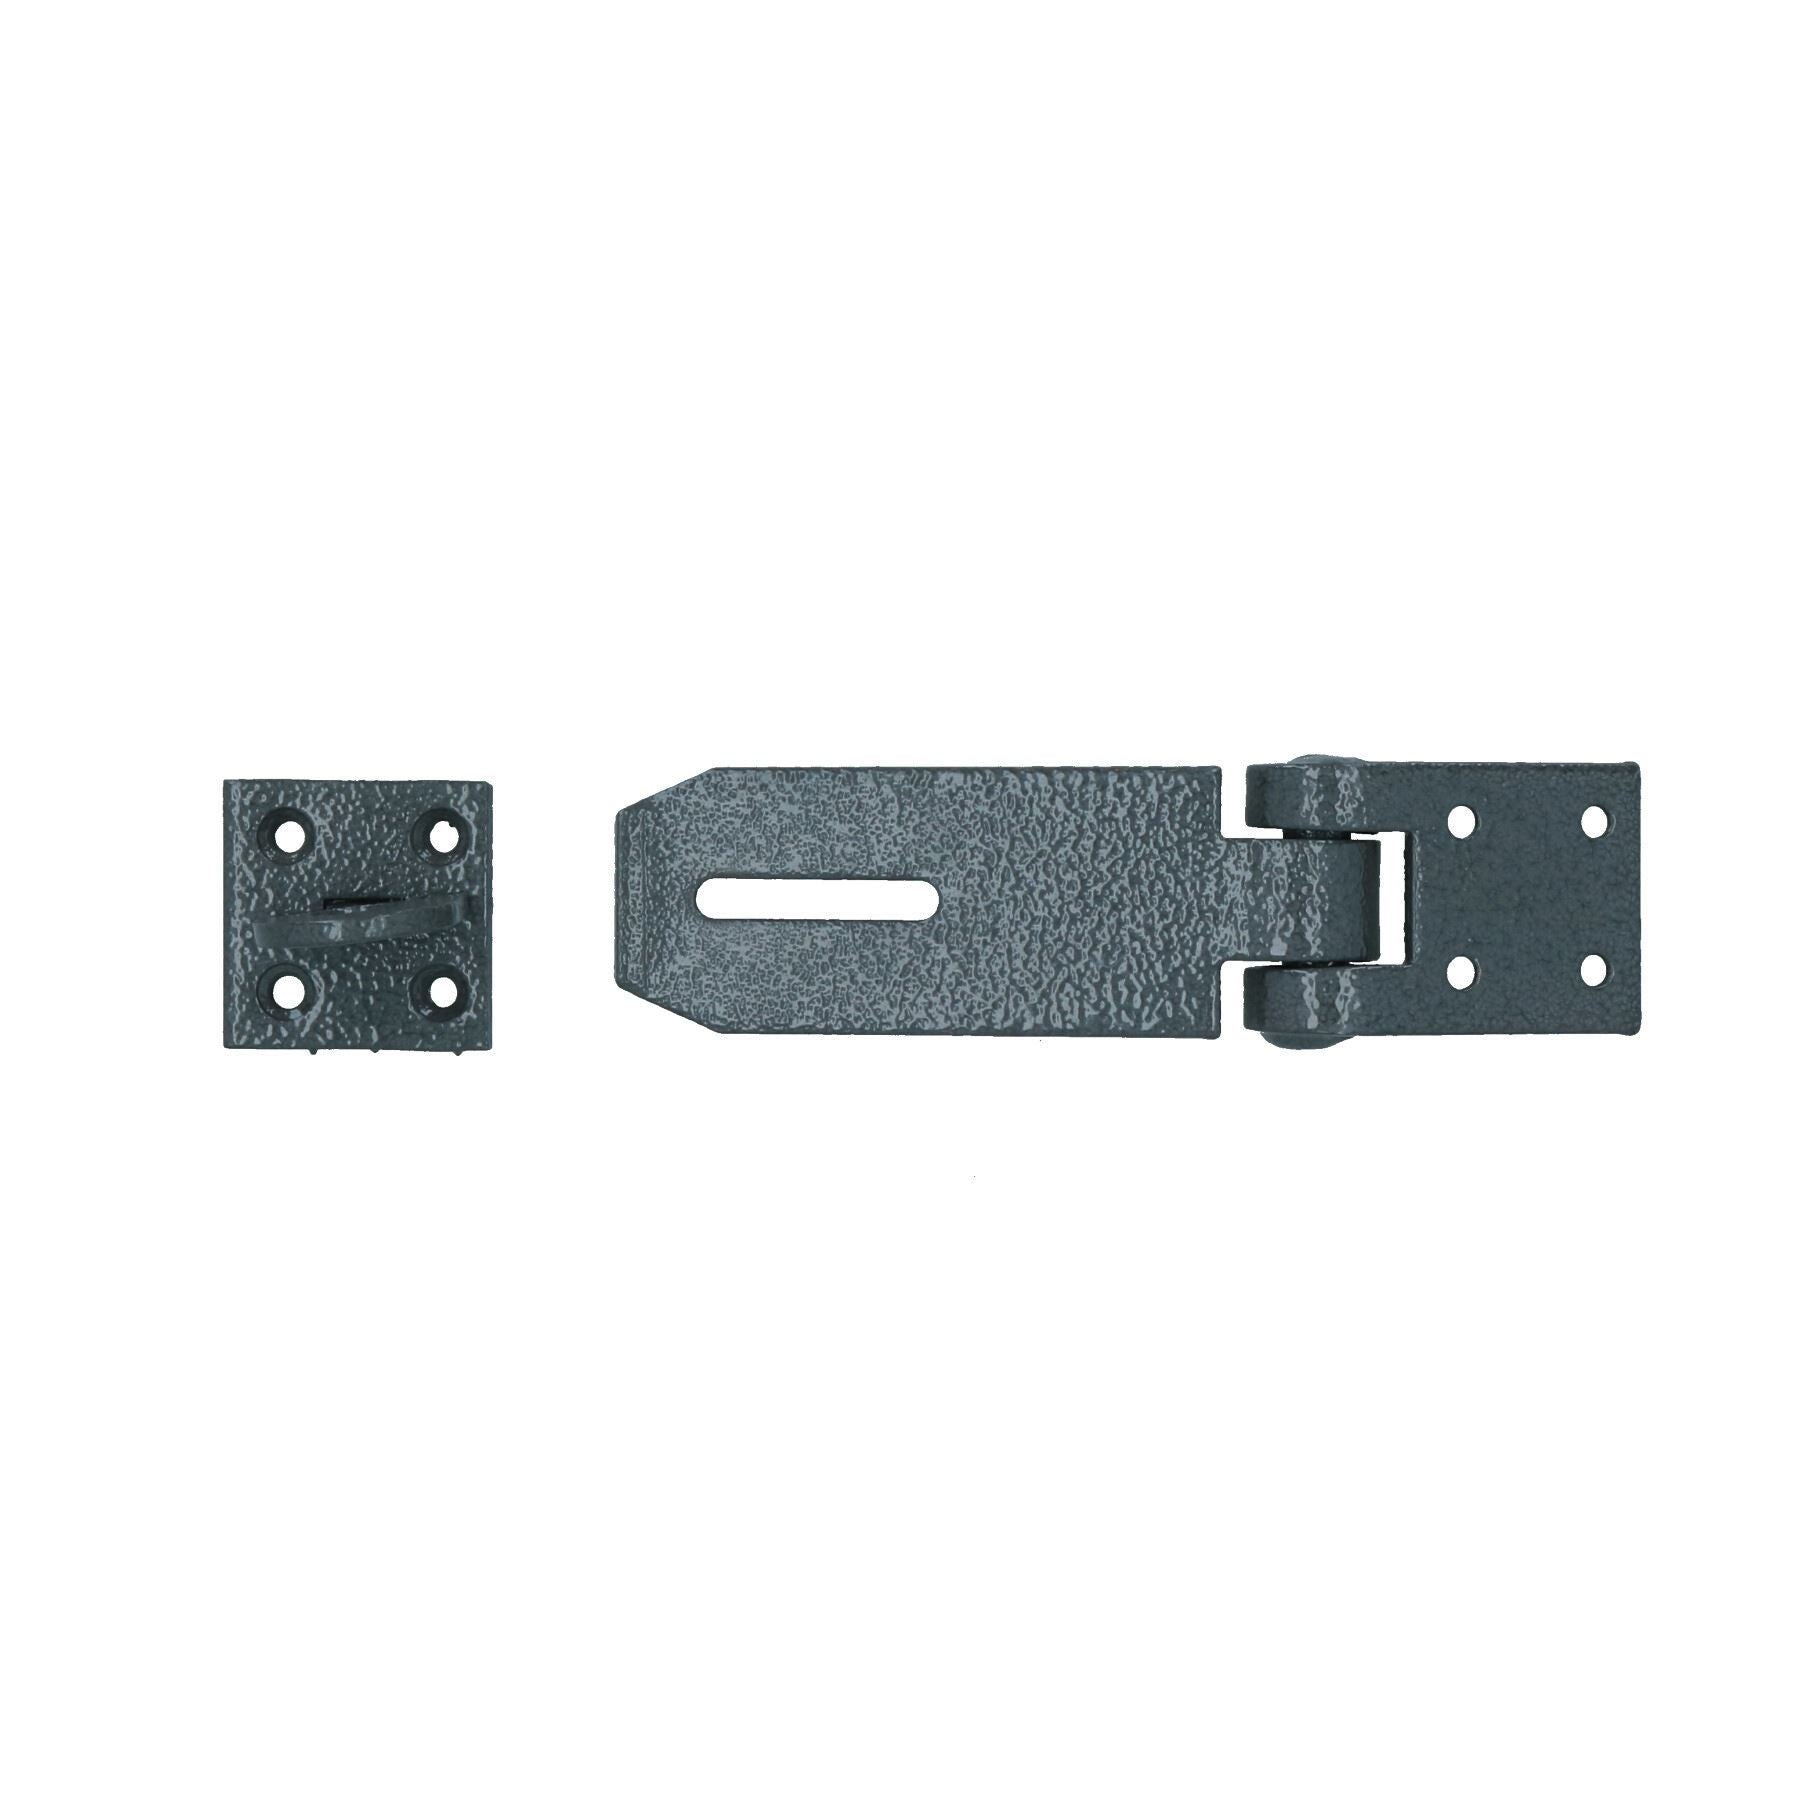 Heavy Duty Hasp and Staple 3.5” x 1.5” Security Lock for Sheds Doors Gates